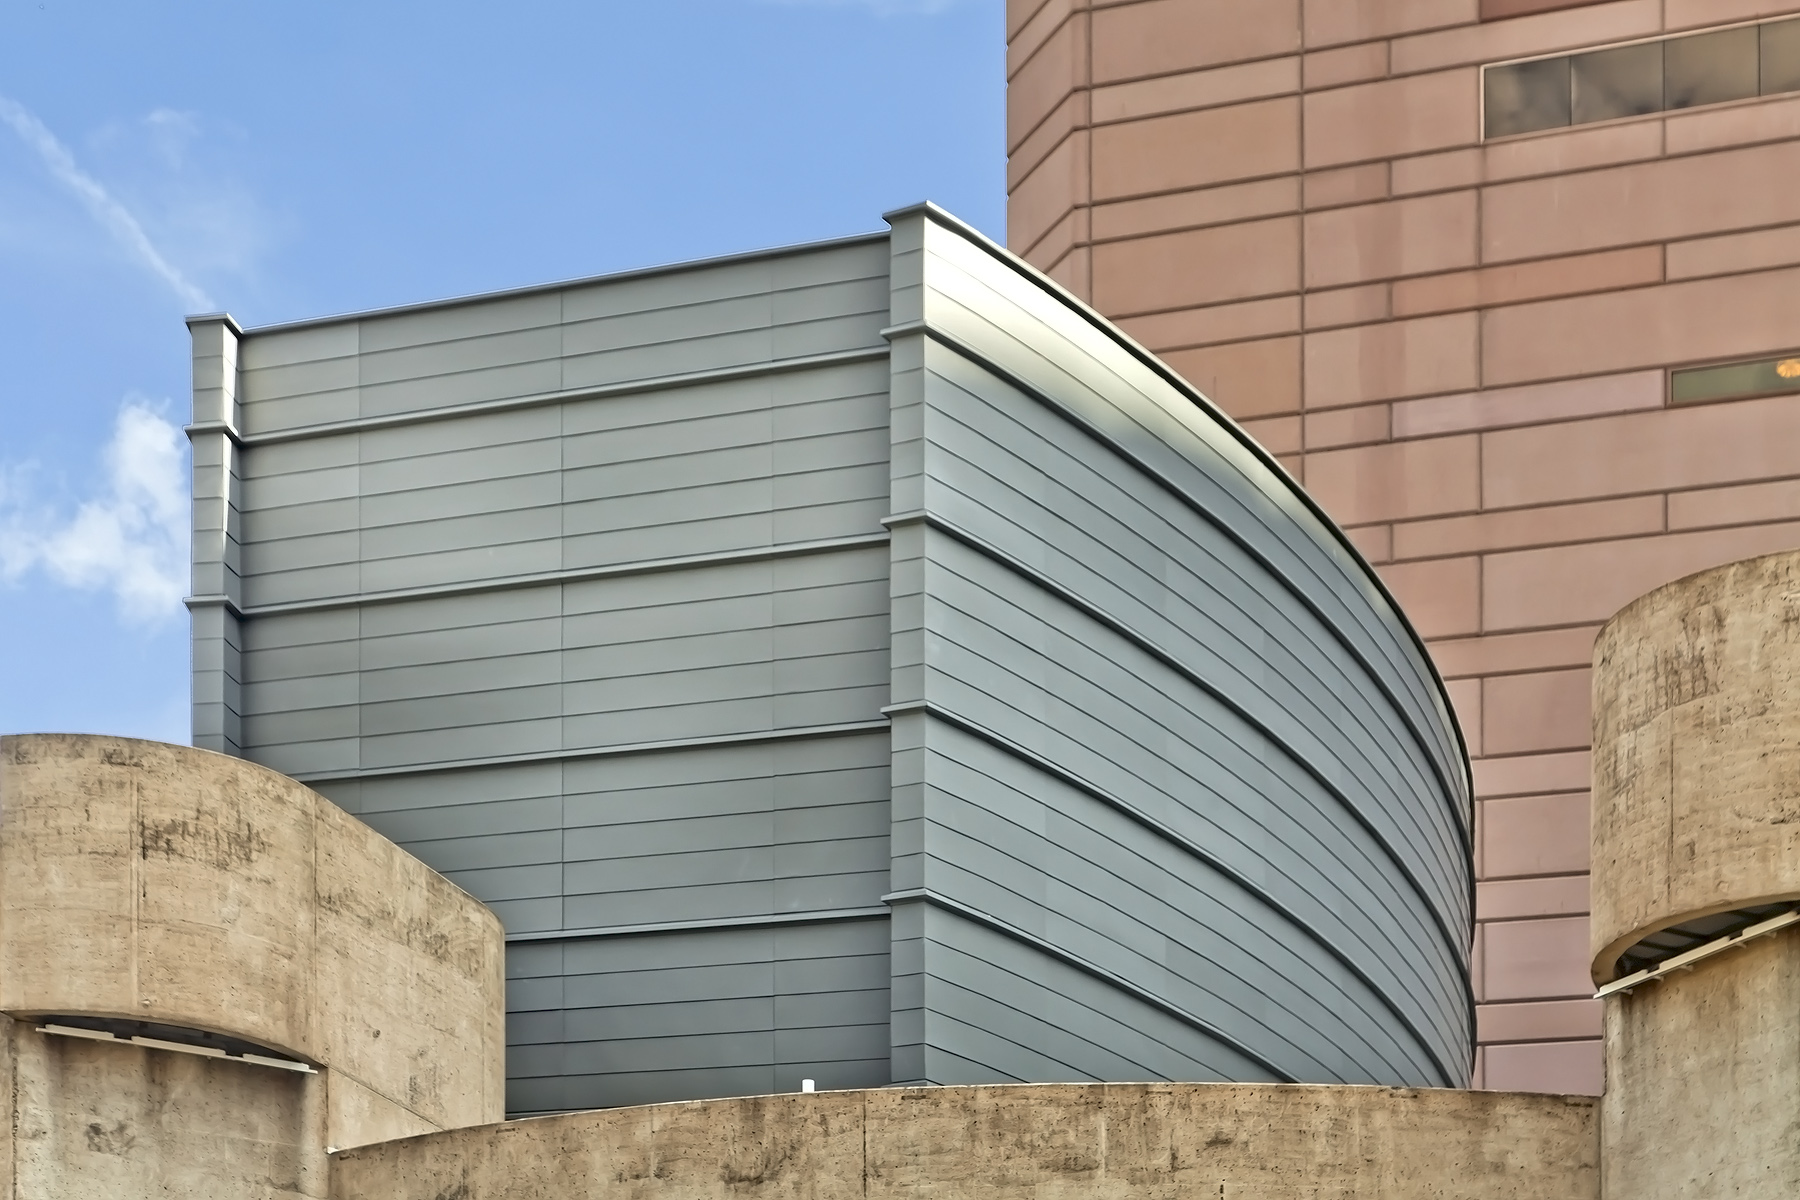 zinc metal panels on alley theater